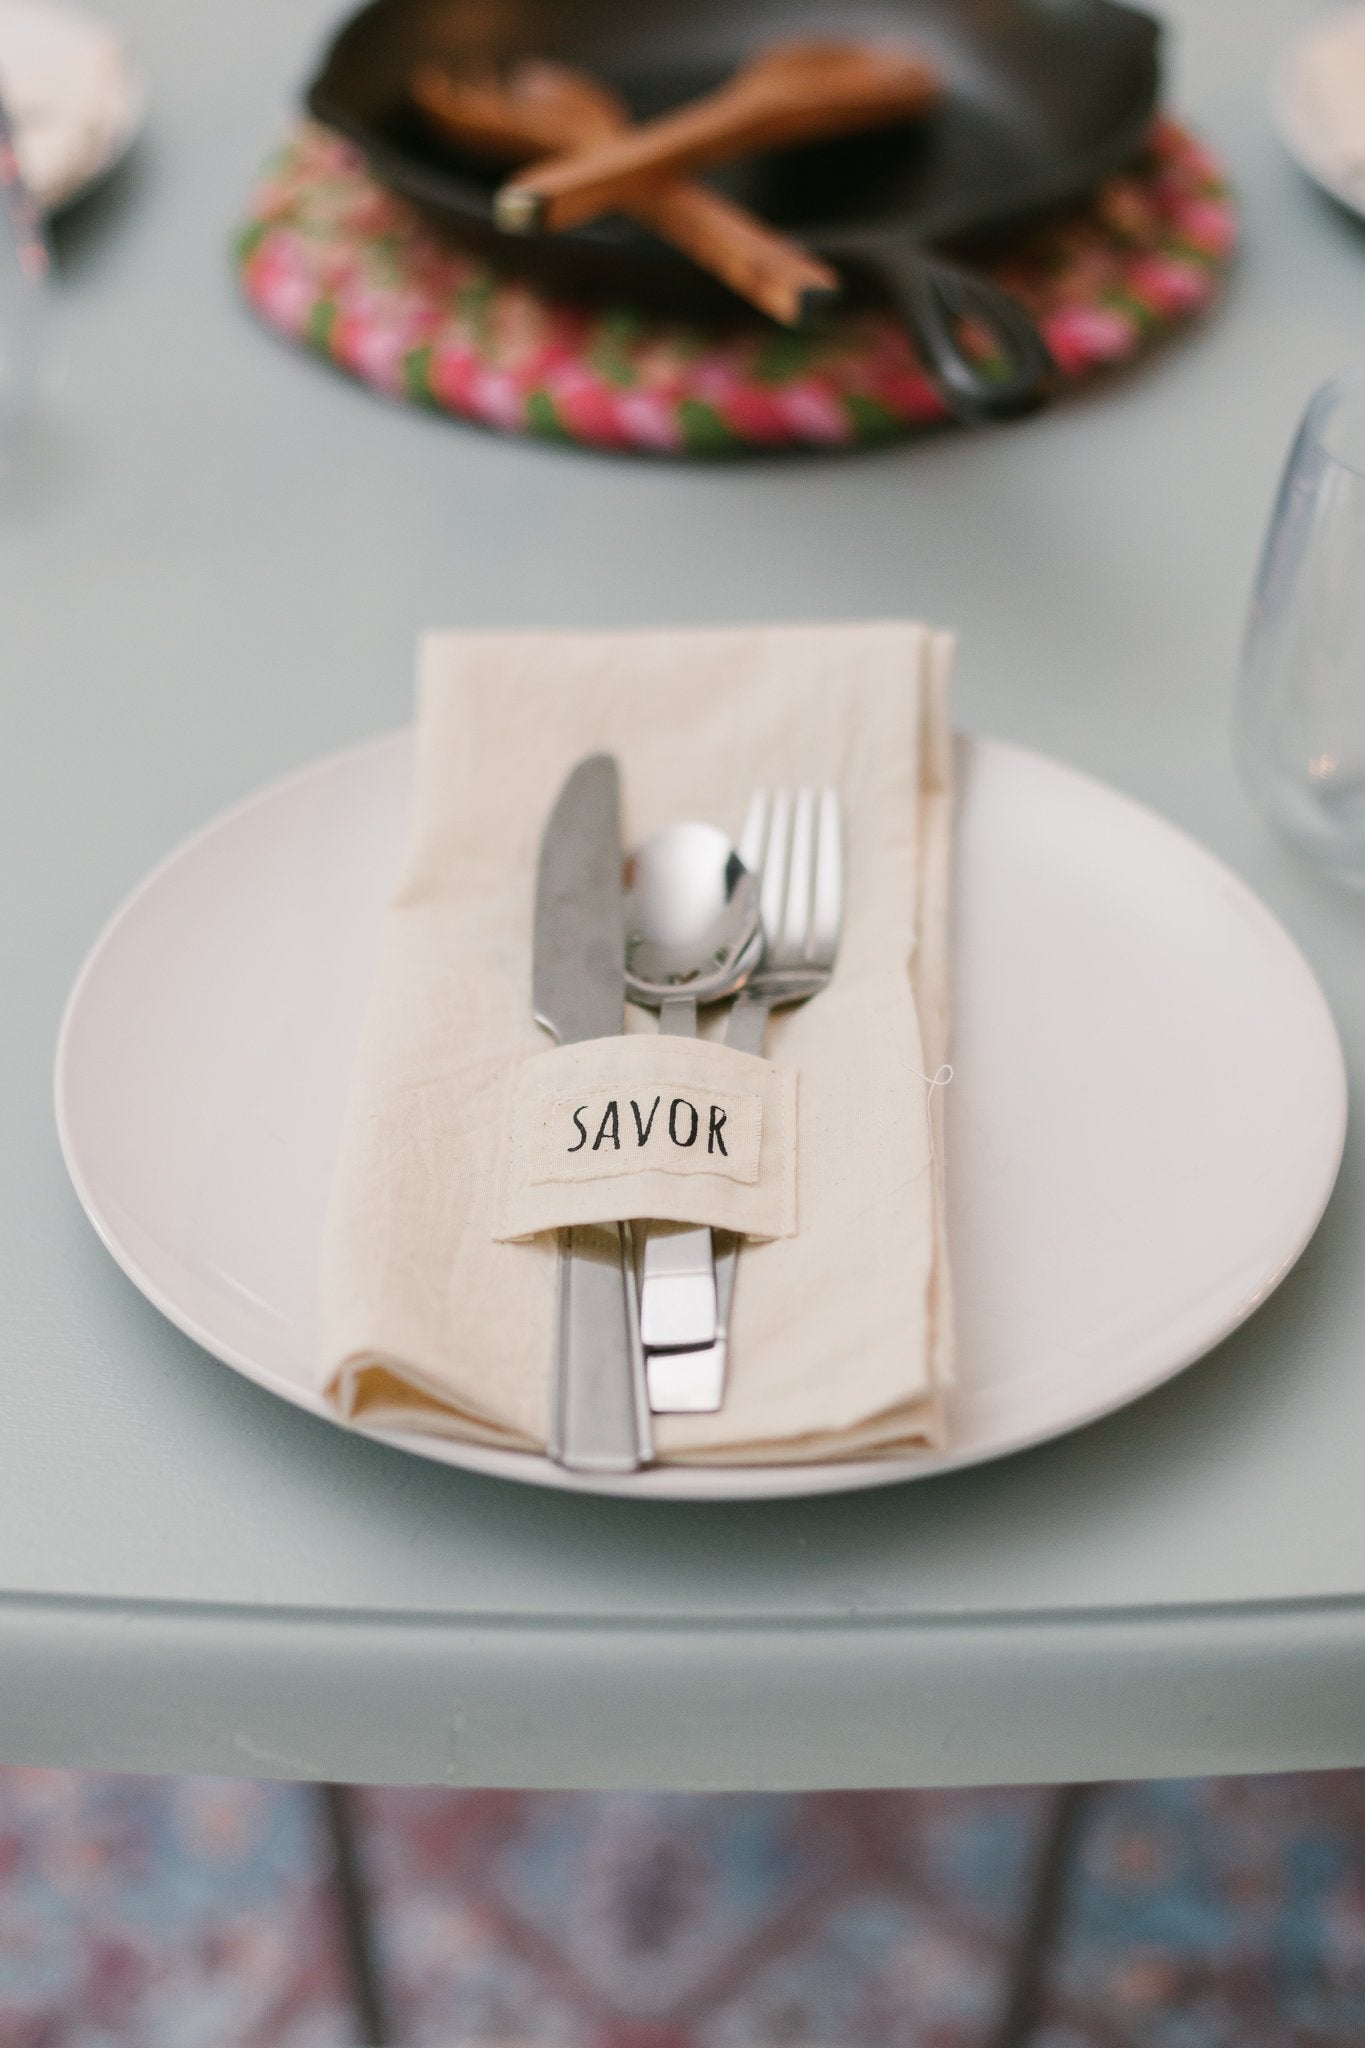 Classic Pocket Napkin Set of 4 with Locally-Printed Words Ideal for Kitchen Use